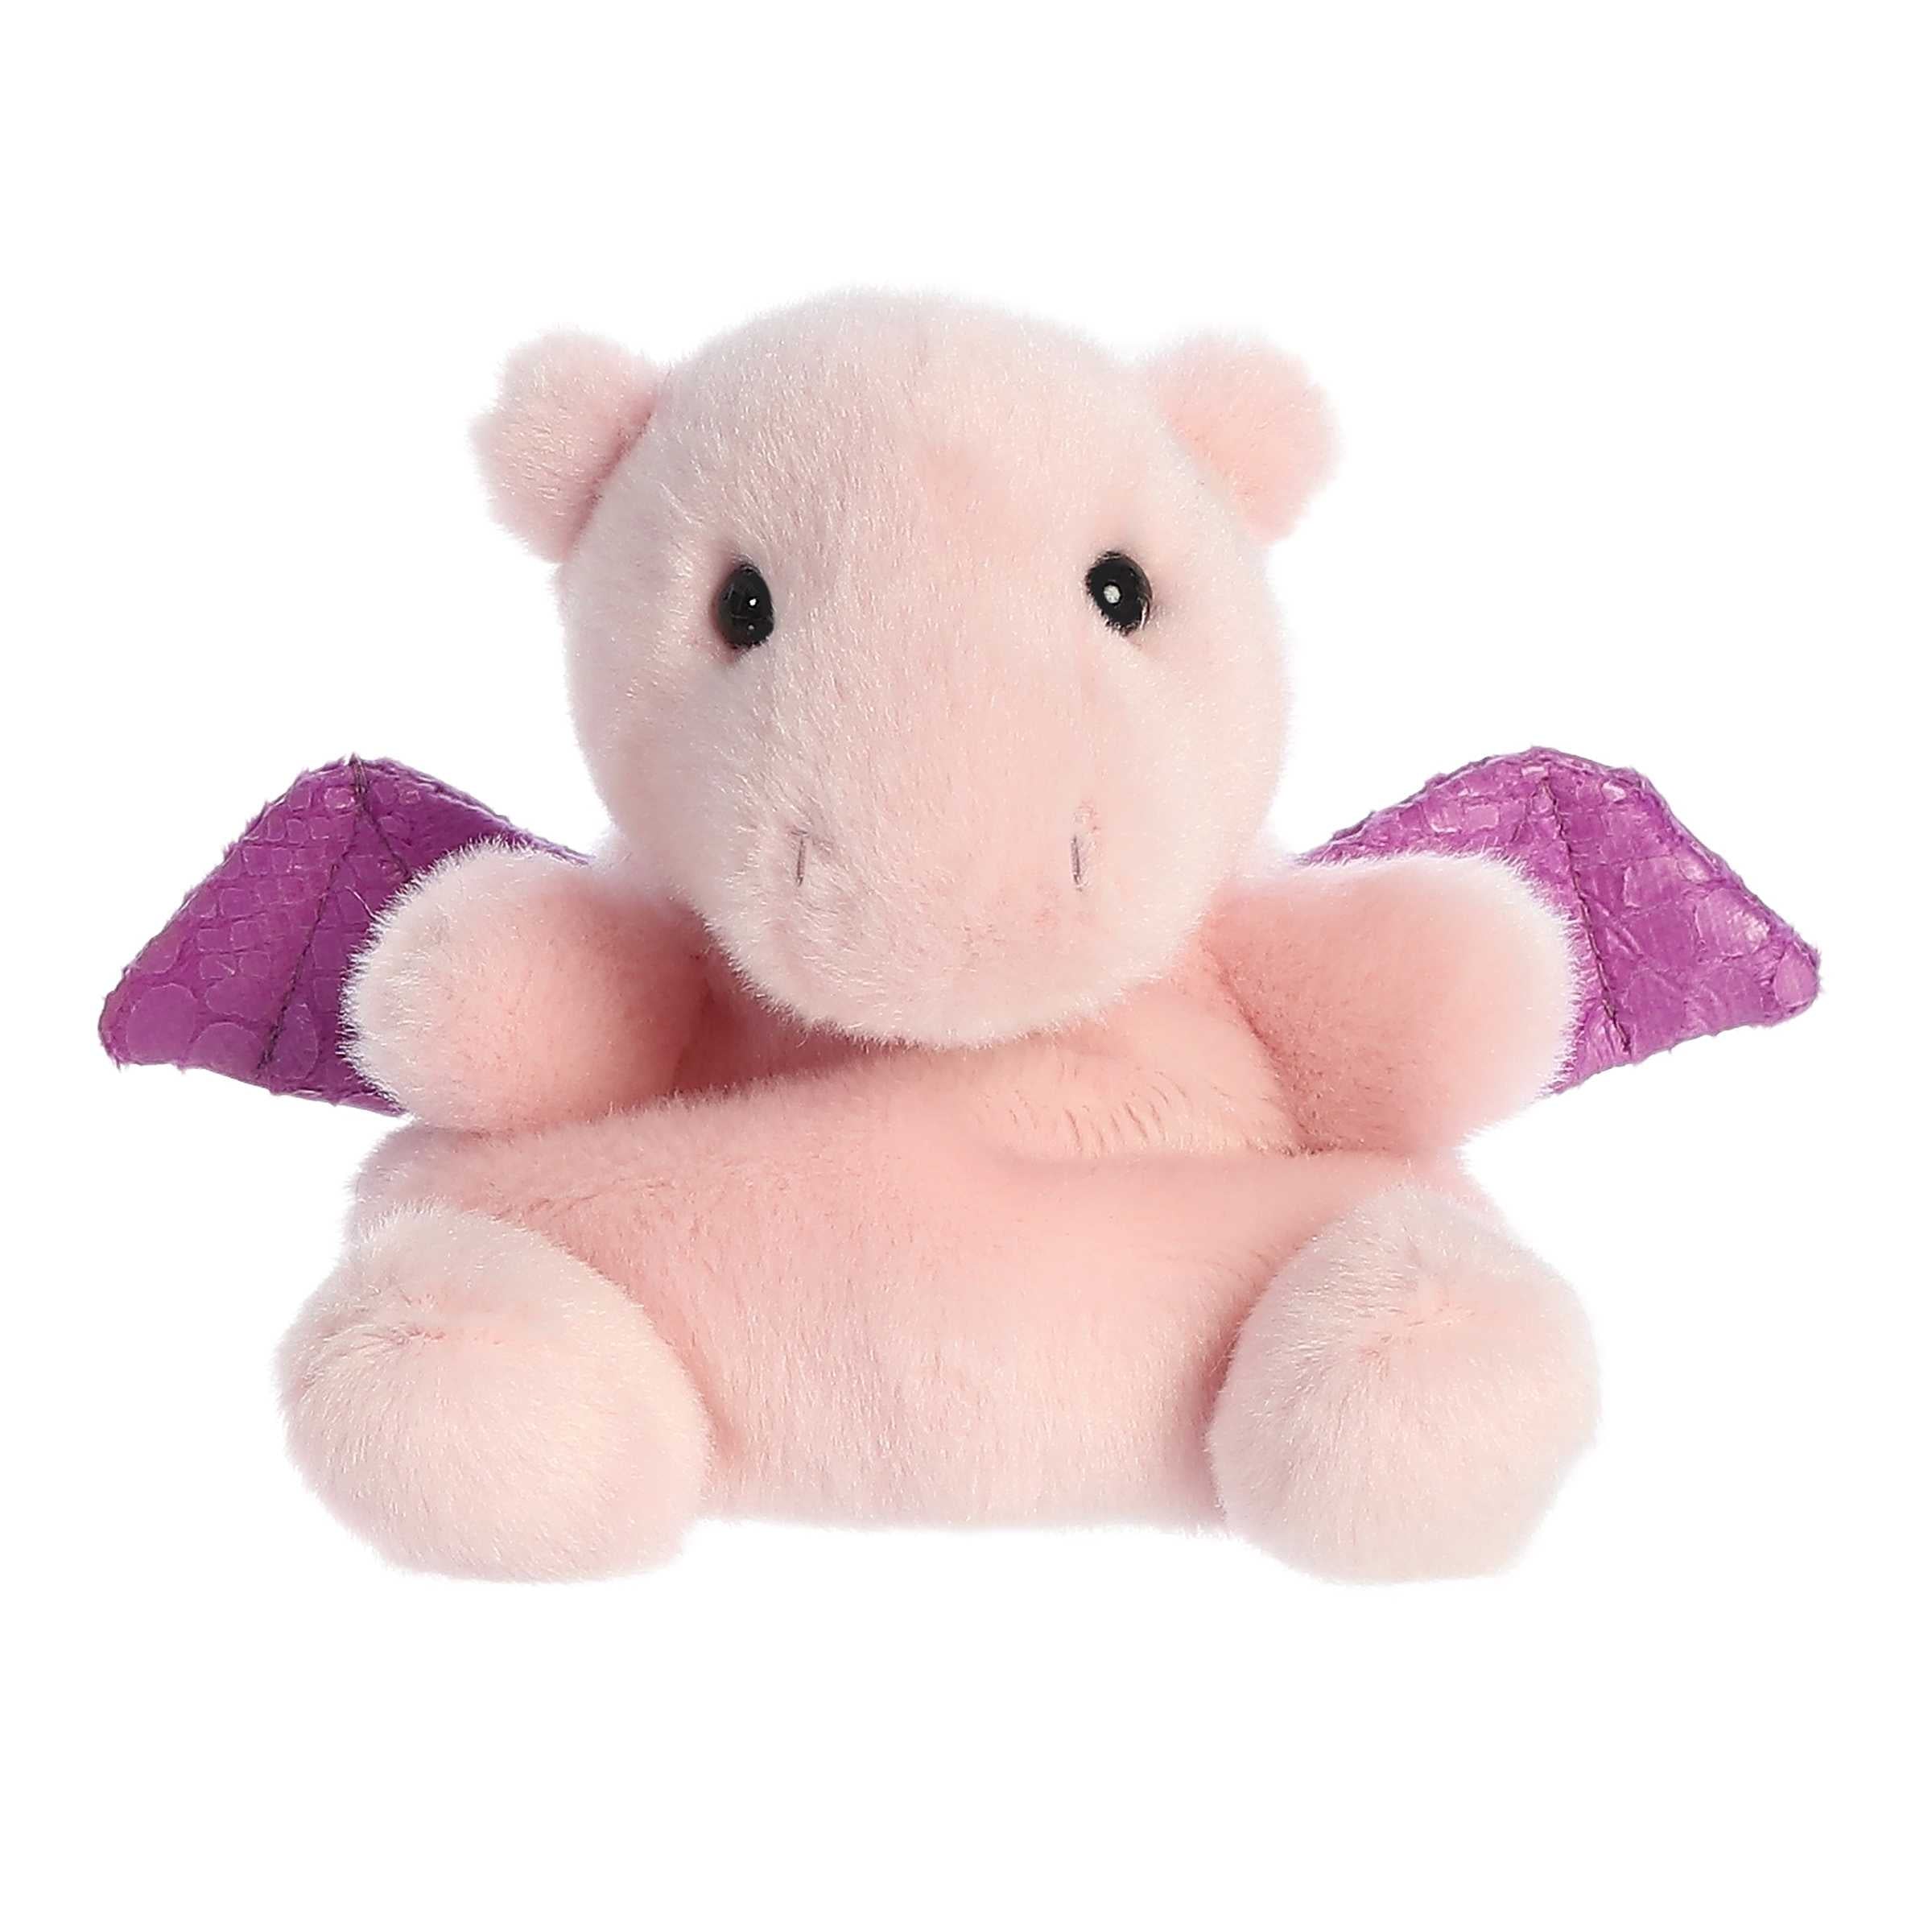 A cute mini dragon plush with soft pink fur, adorable round ears, and a royal purple pair of wings